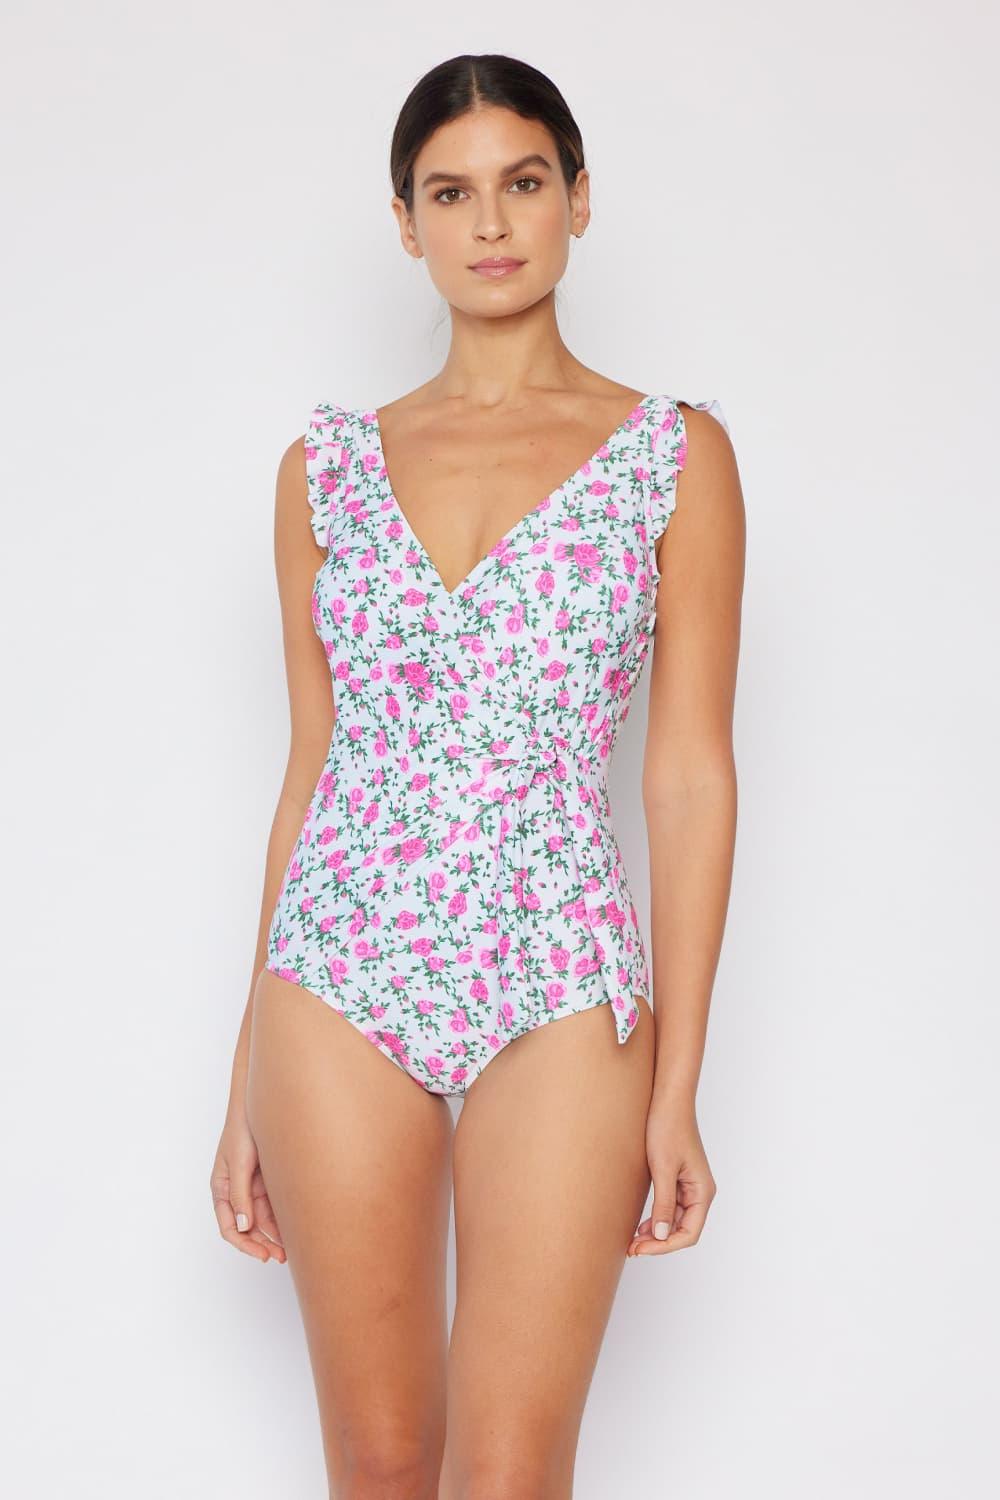 Marina West Swim Float On in Roses Off-White Ruffle Faux Wrap One-Piece - Crazy Like a Daisy Boutique #